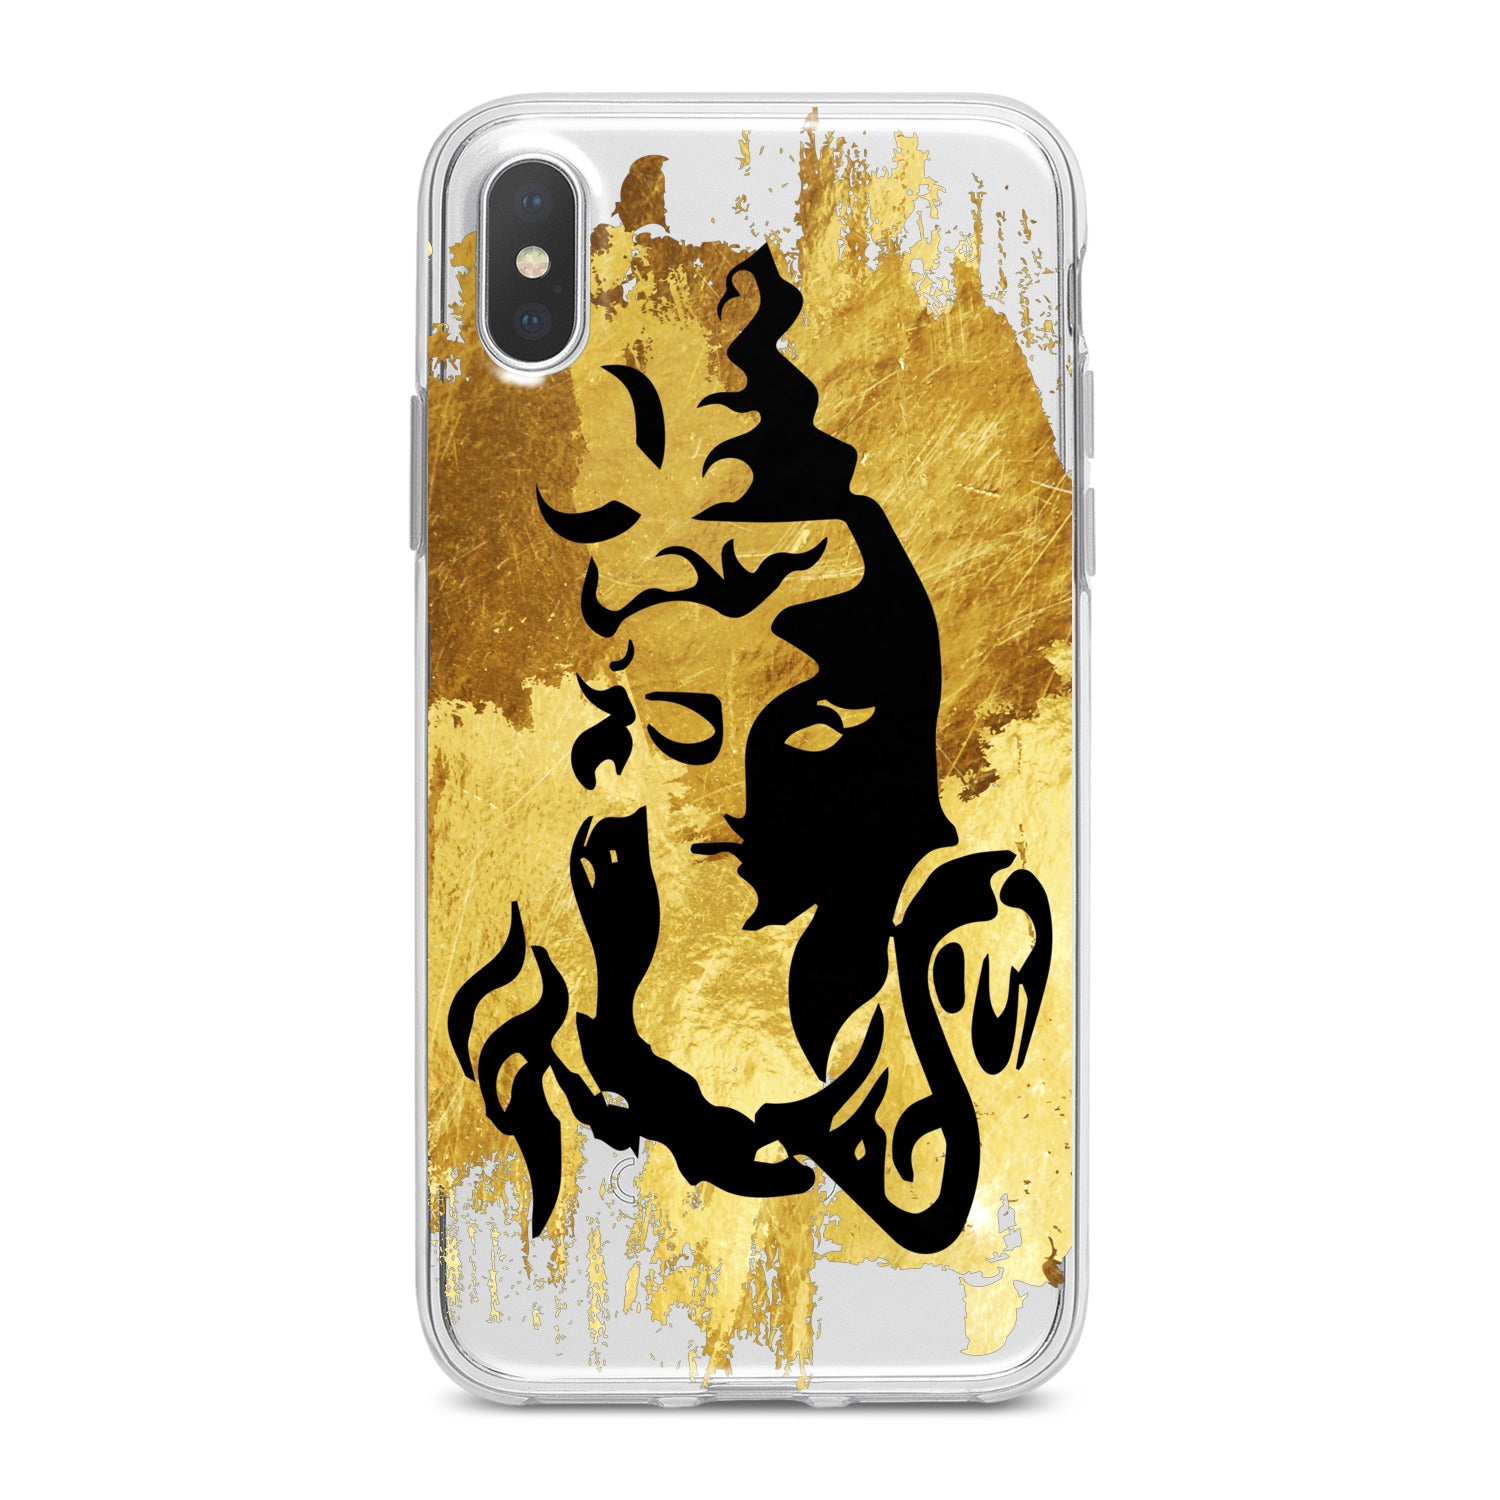 Lex Altern Golden Shiva Phone Case for your iPhone & Android phone.